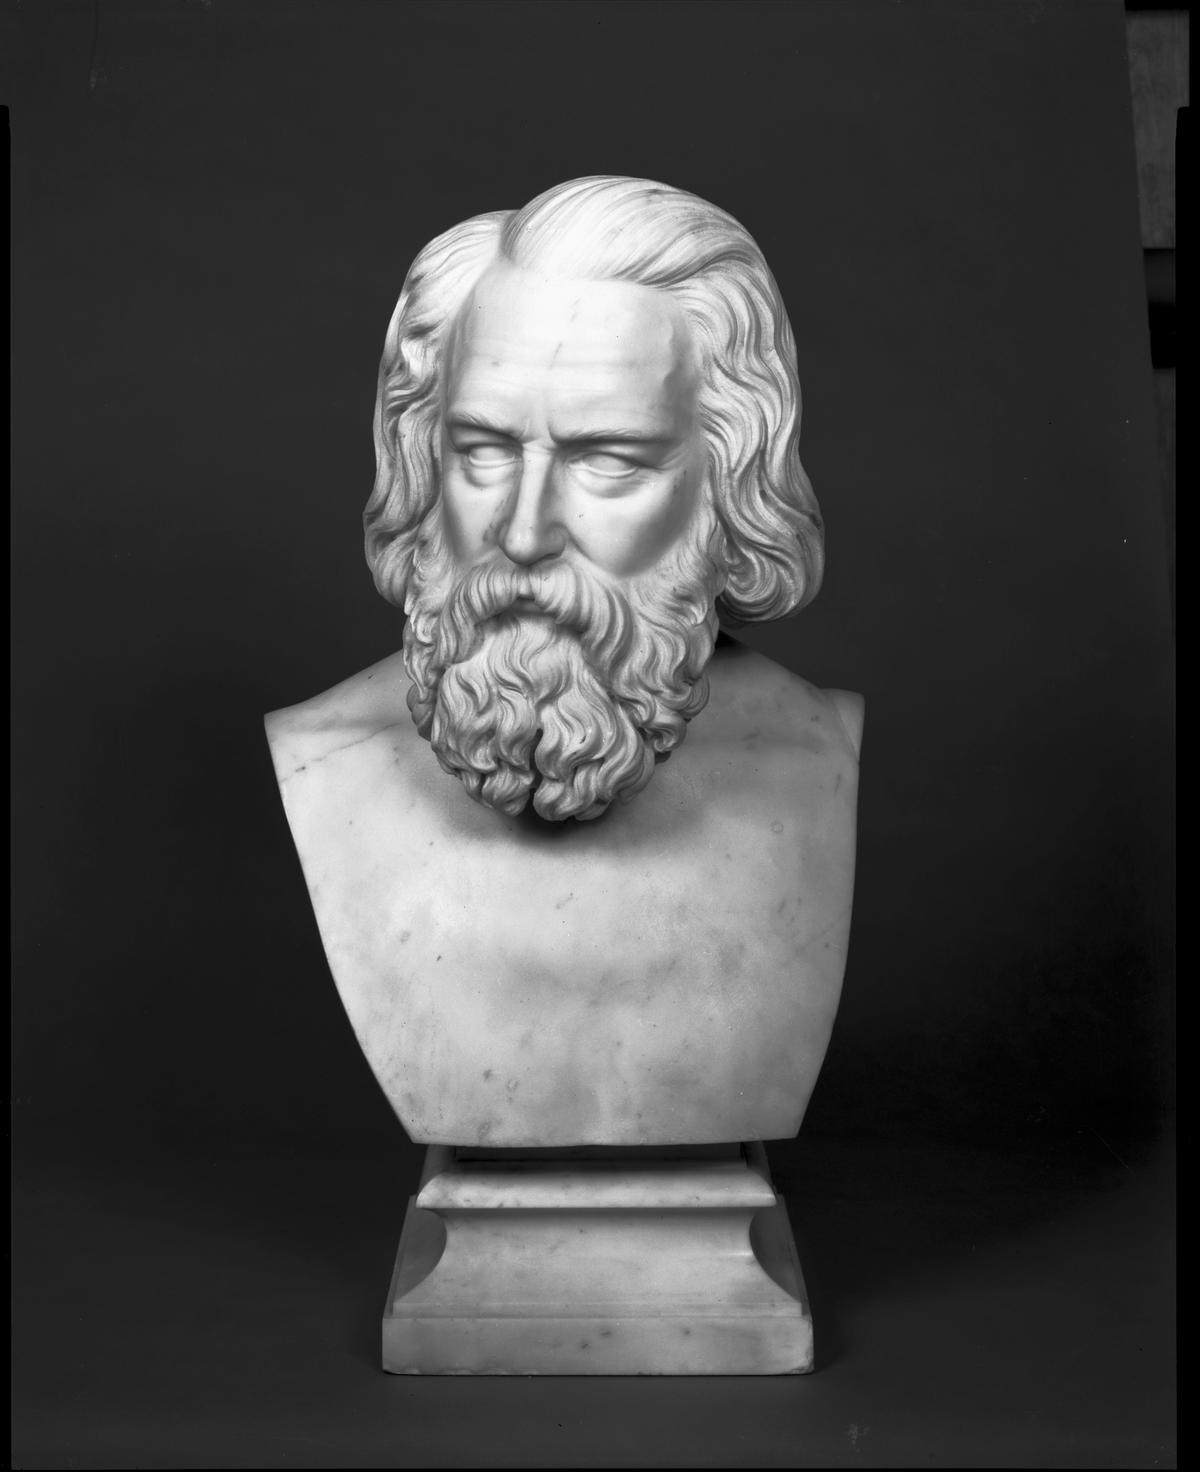 Henry Wadsworth Longfellow (1807–1882), 1871, by Edmonia Lewis. Marble, 29.25 by 16.25 by 13.25 inches. Harvard University Portrait Collection, Cambridge, Mass. (With permission, <a href="https://hvrd.art/o/303587">© President and Fellows of Harvard College</a>)